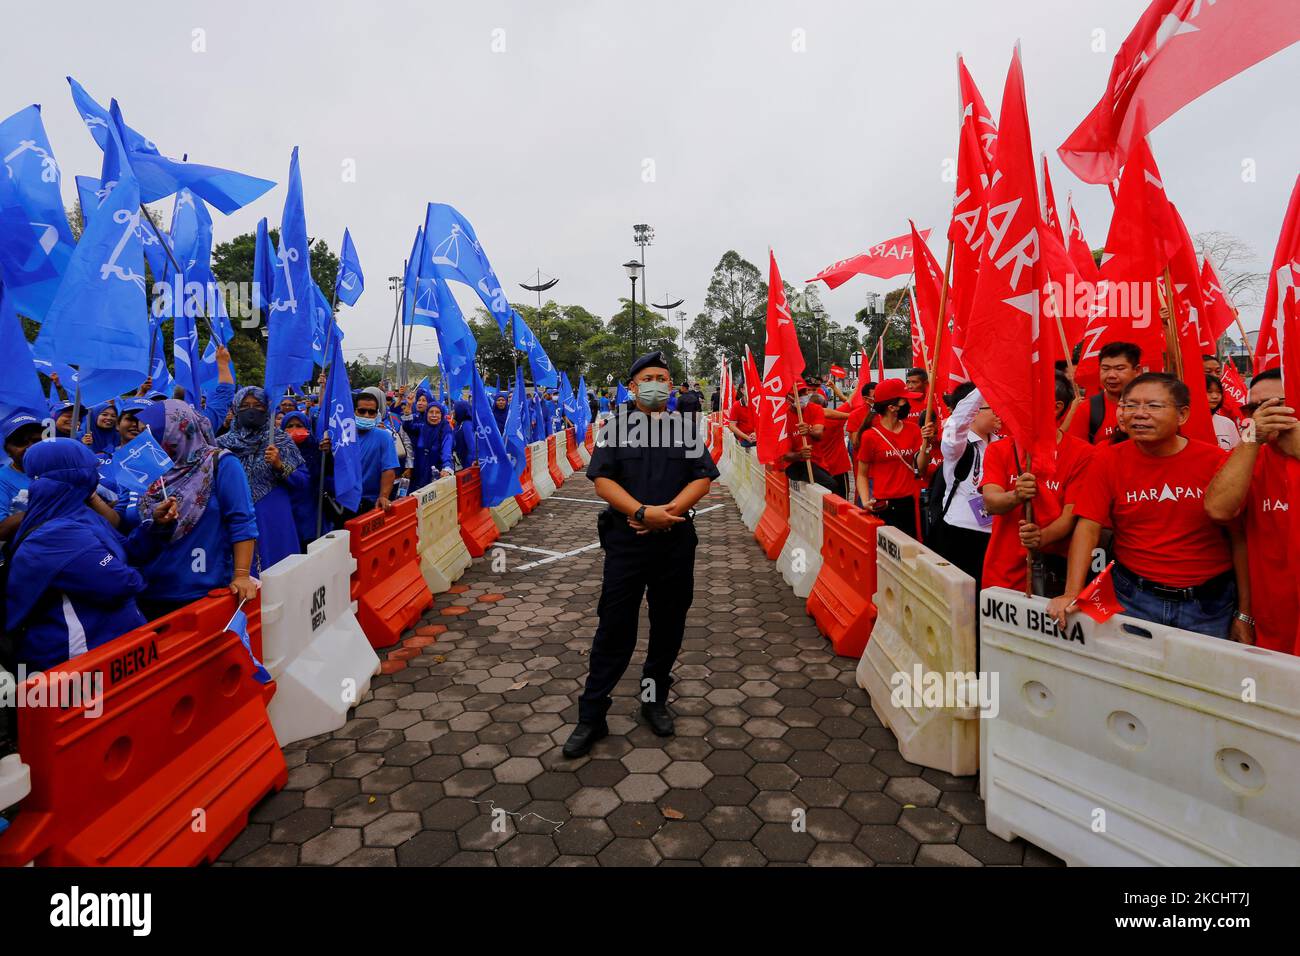 A police stands guard between supporters of The National Front coalition, Barisan Nasional, and The Alliance Of Hope, Pakatan Harapan, outside a nomination centre on nomination day in Bera, Pahang, Malaysia November 5, 2022. REUTERS/Lai Seng Sin Stock Photo